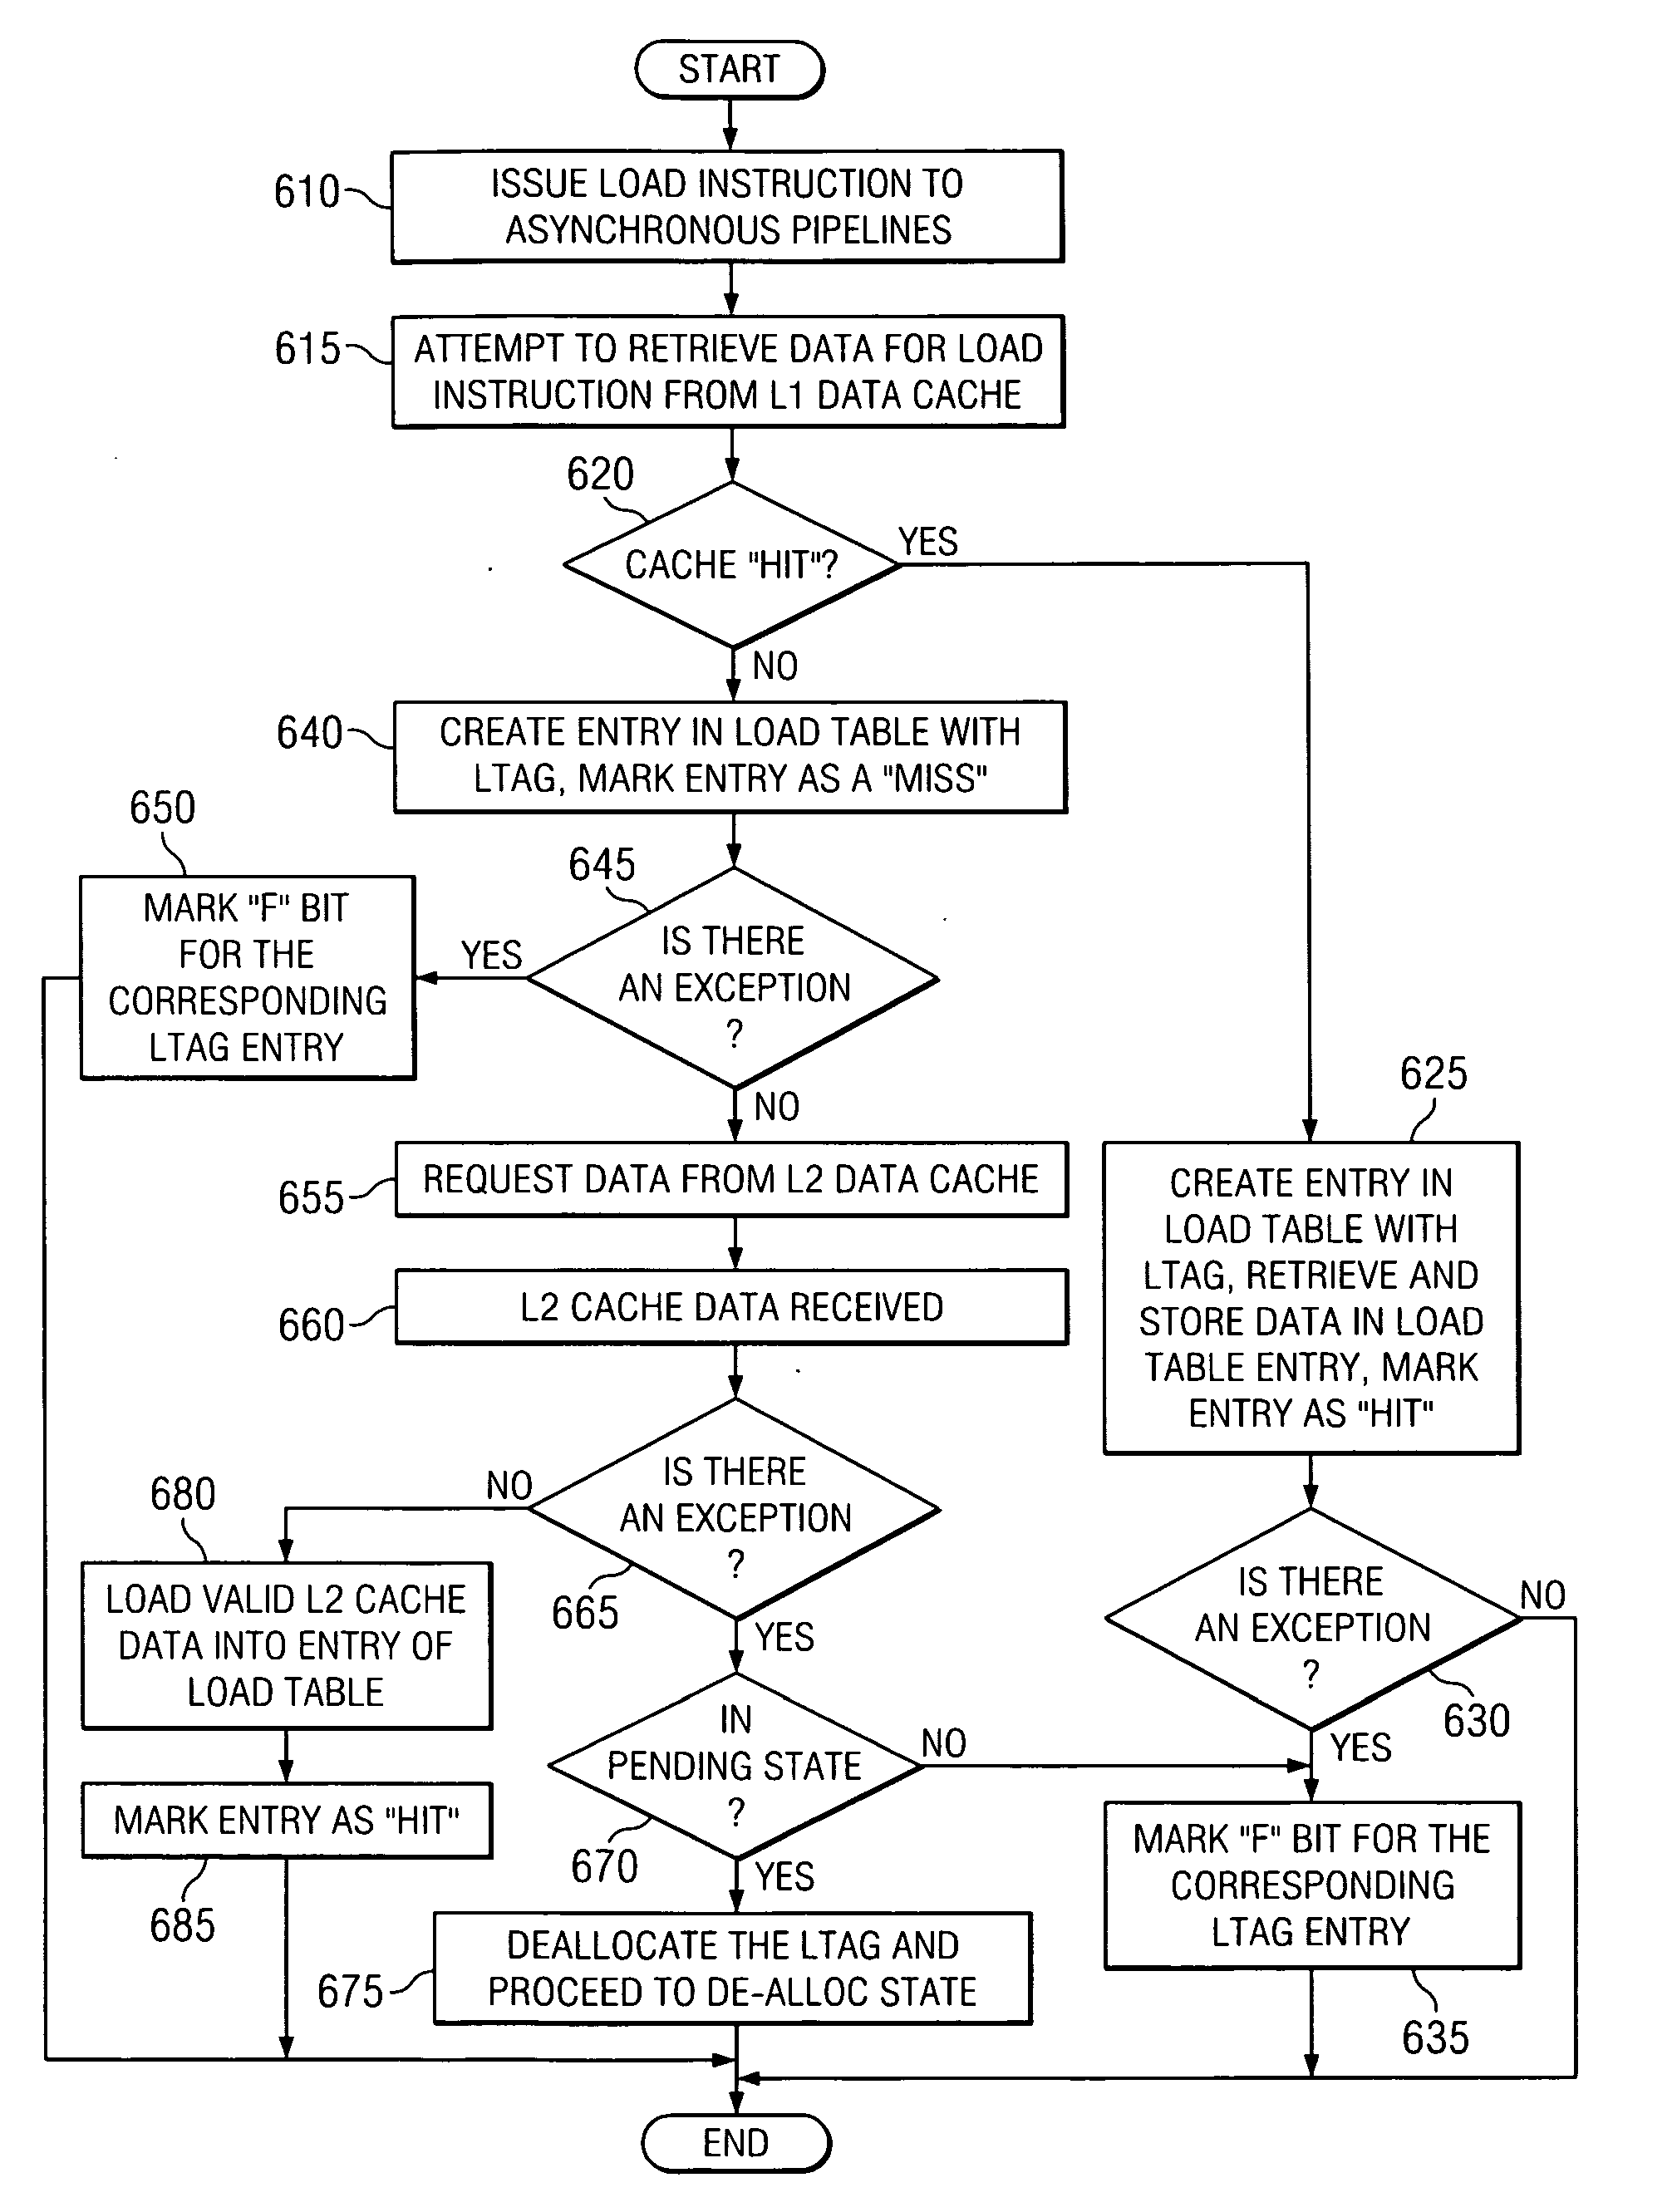 Apparatus and method for handling data cache misses out-of-order for asynchronous pipelines